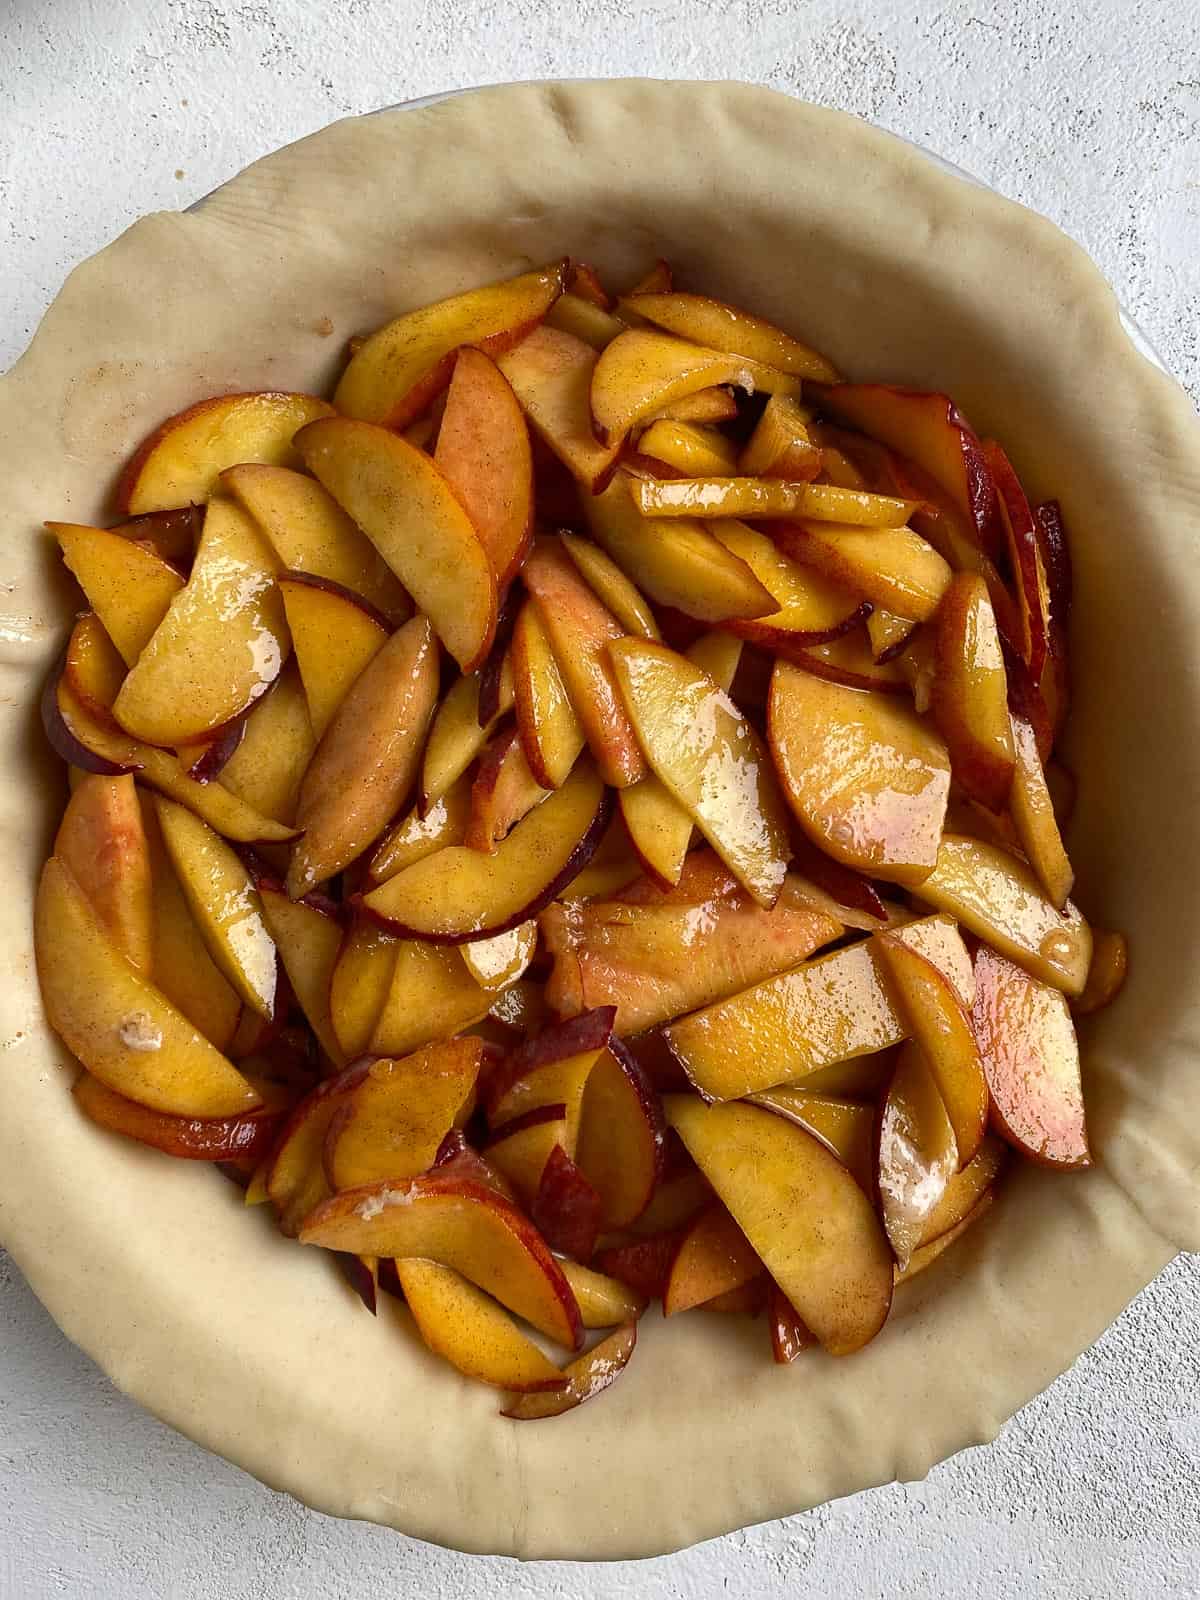 pre-baked pie with peach filling inside